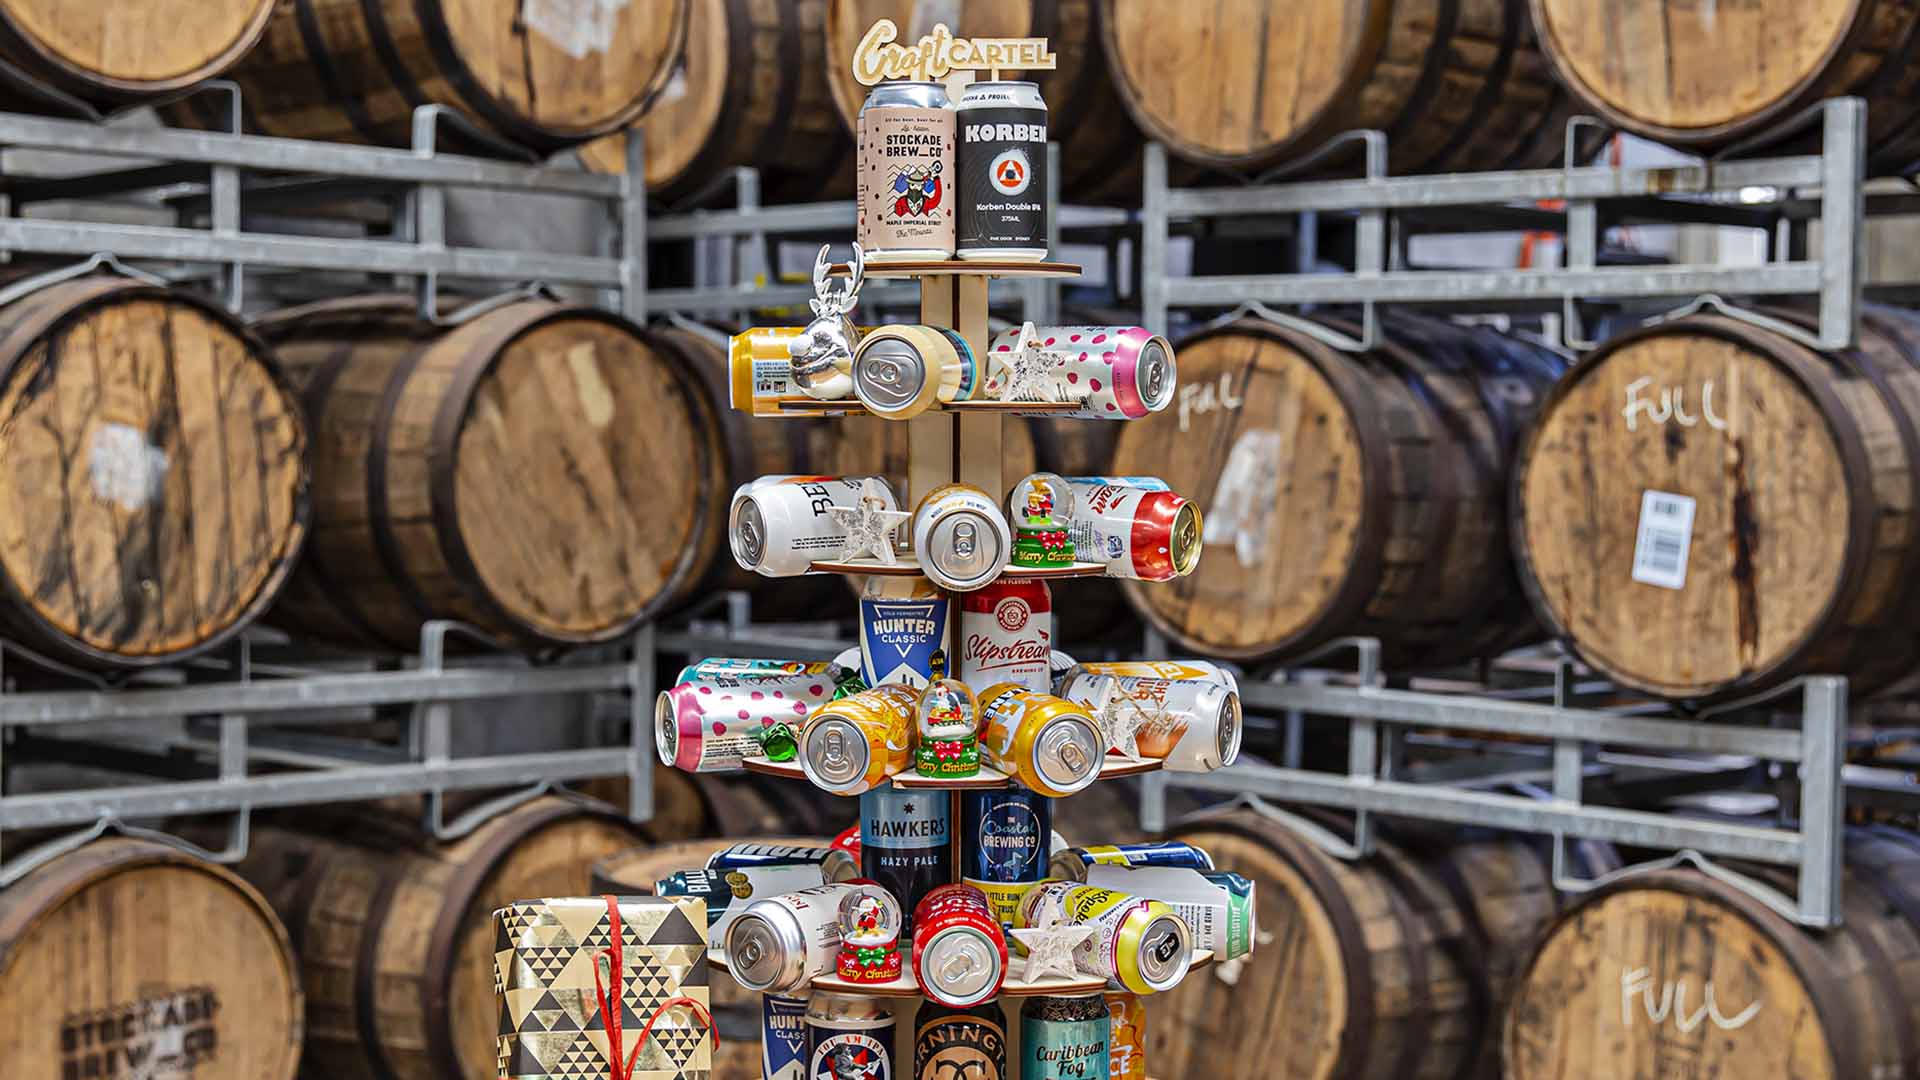 This Christmas Tinnie Tree Is Stacked with Craft Beers to Make Your Festive Season Extra Merry